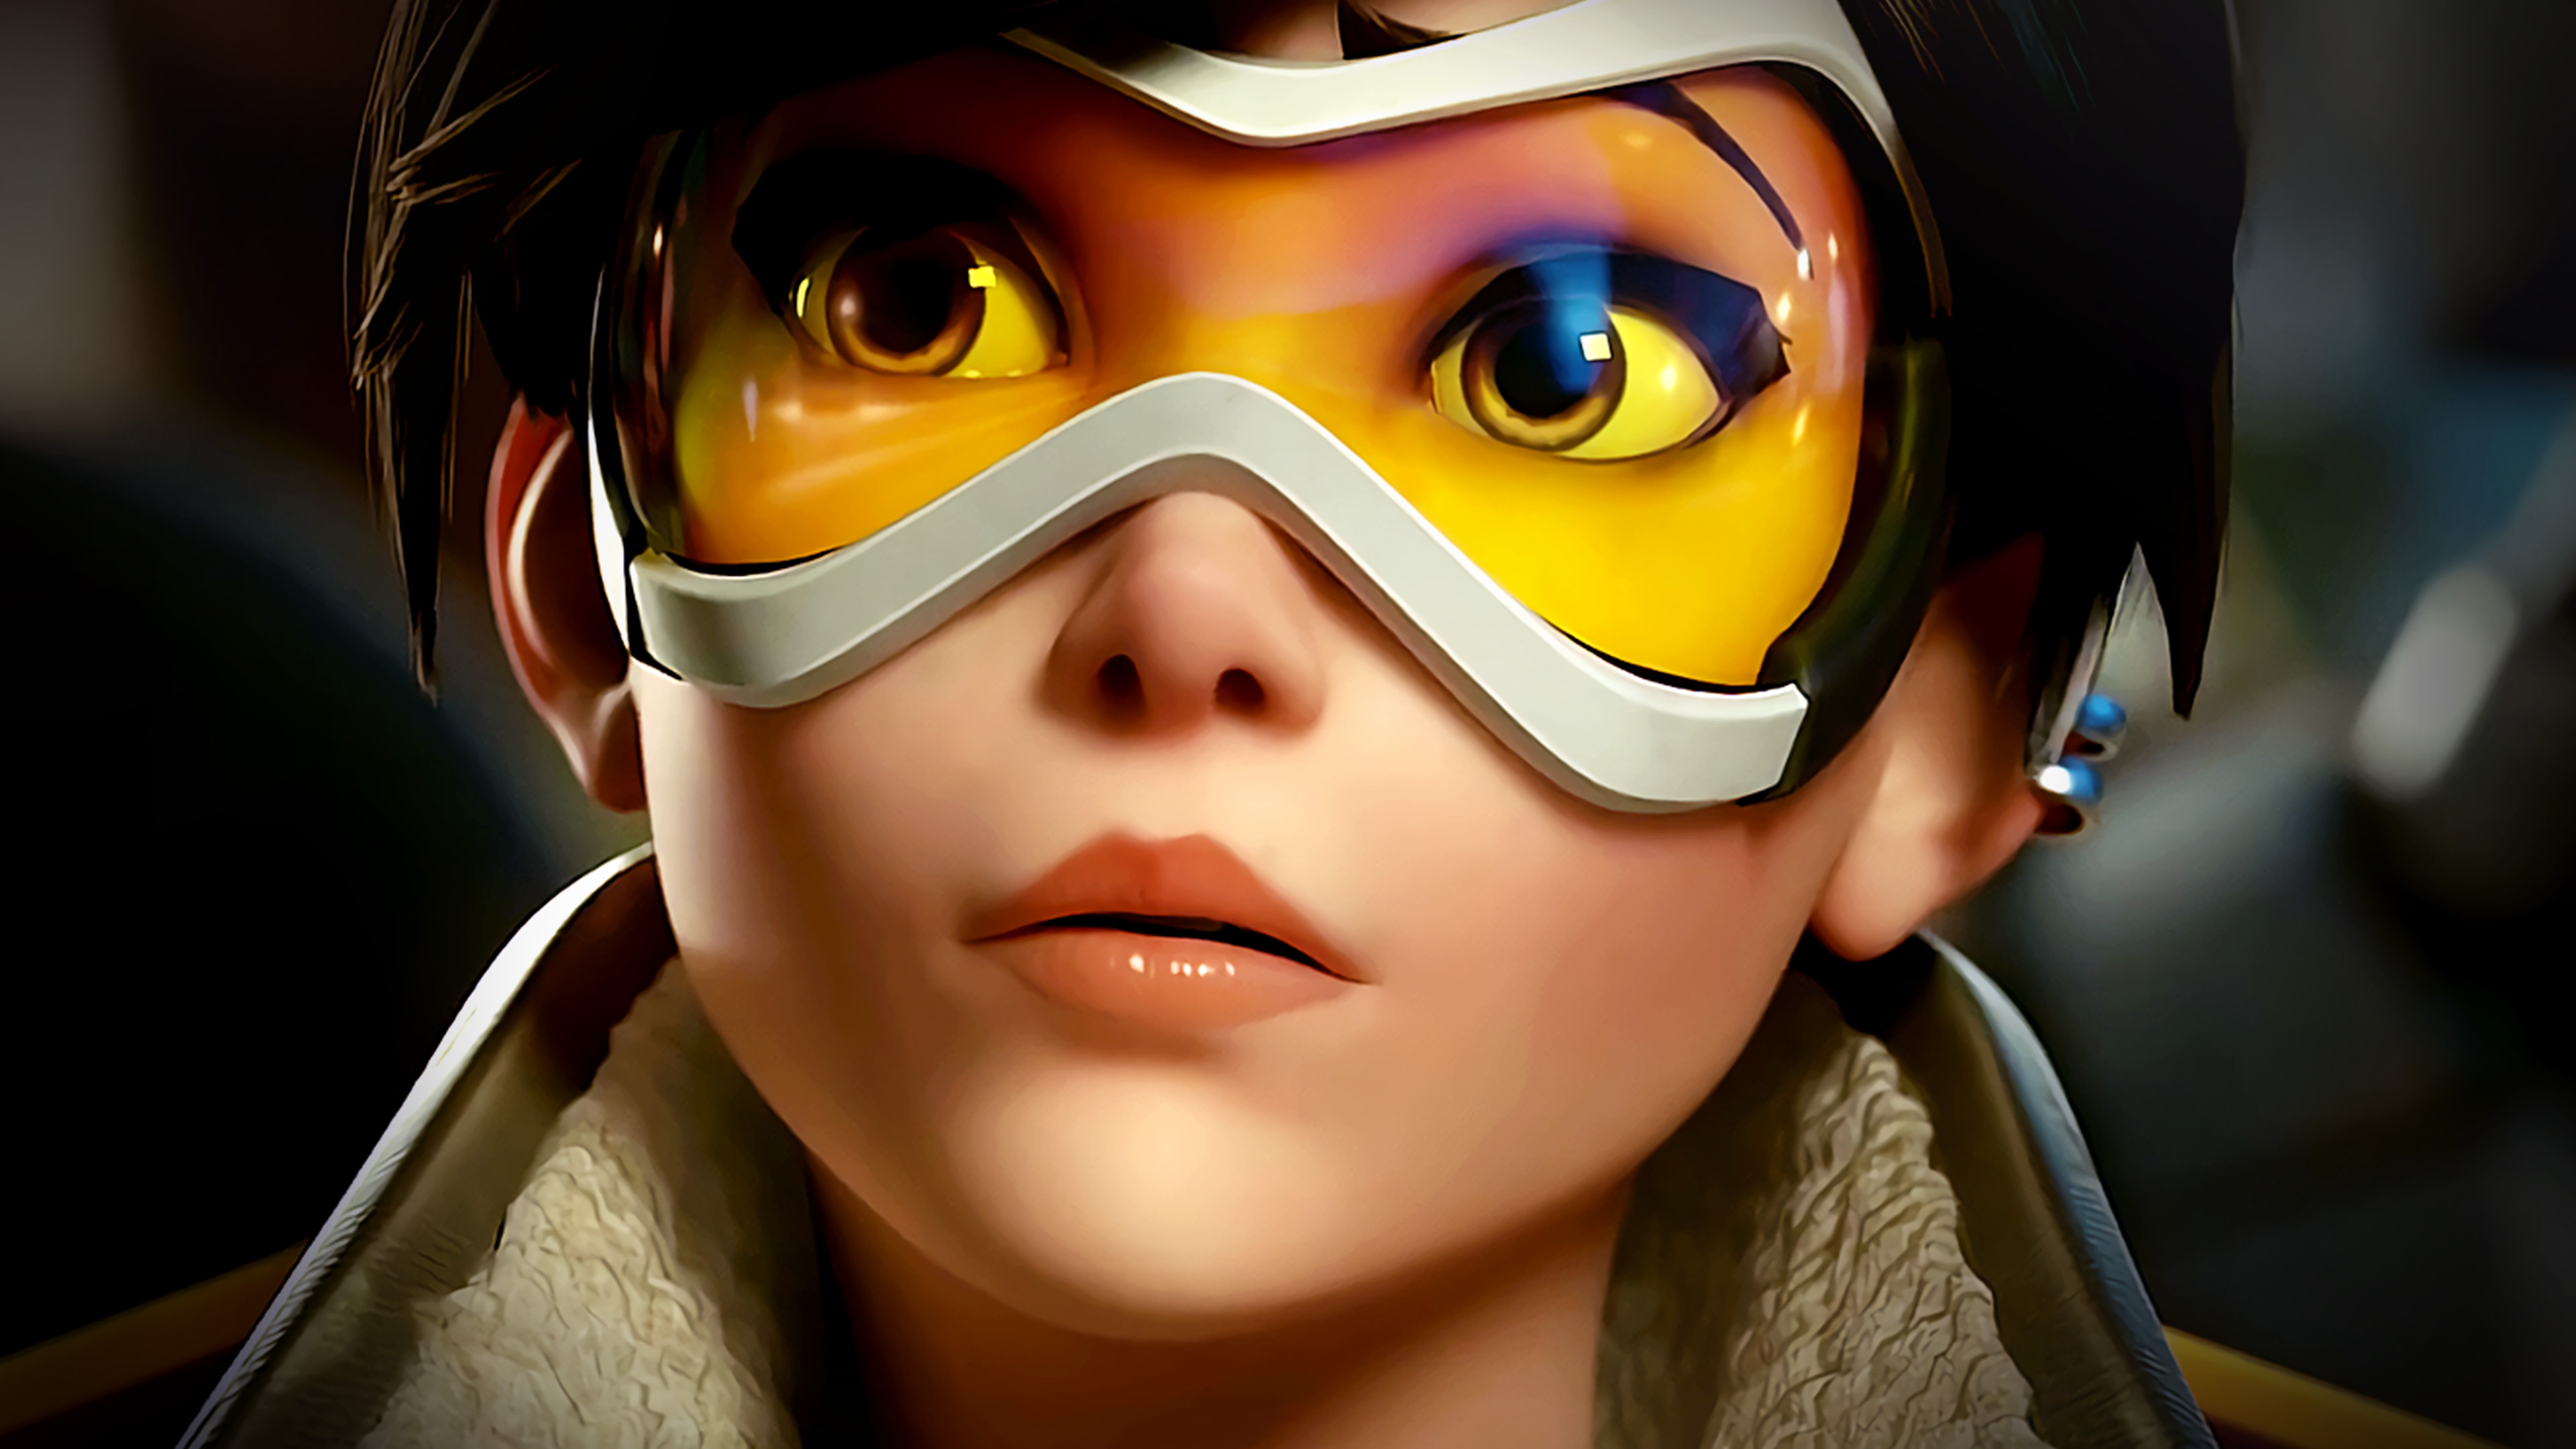 Tracer Overwatch Wallpapers